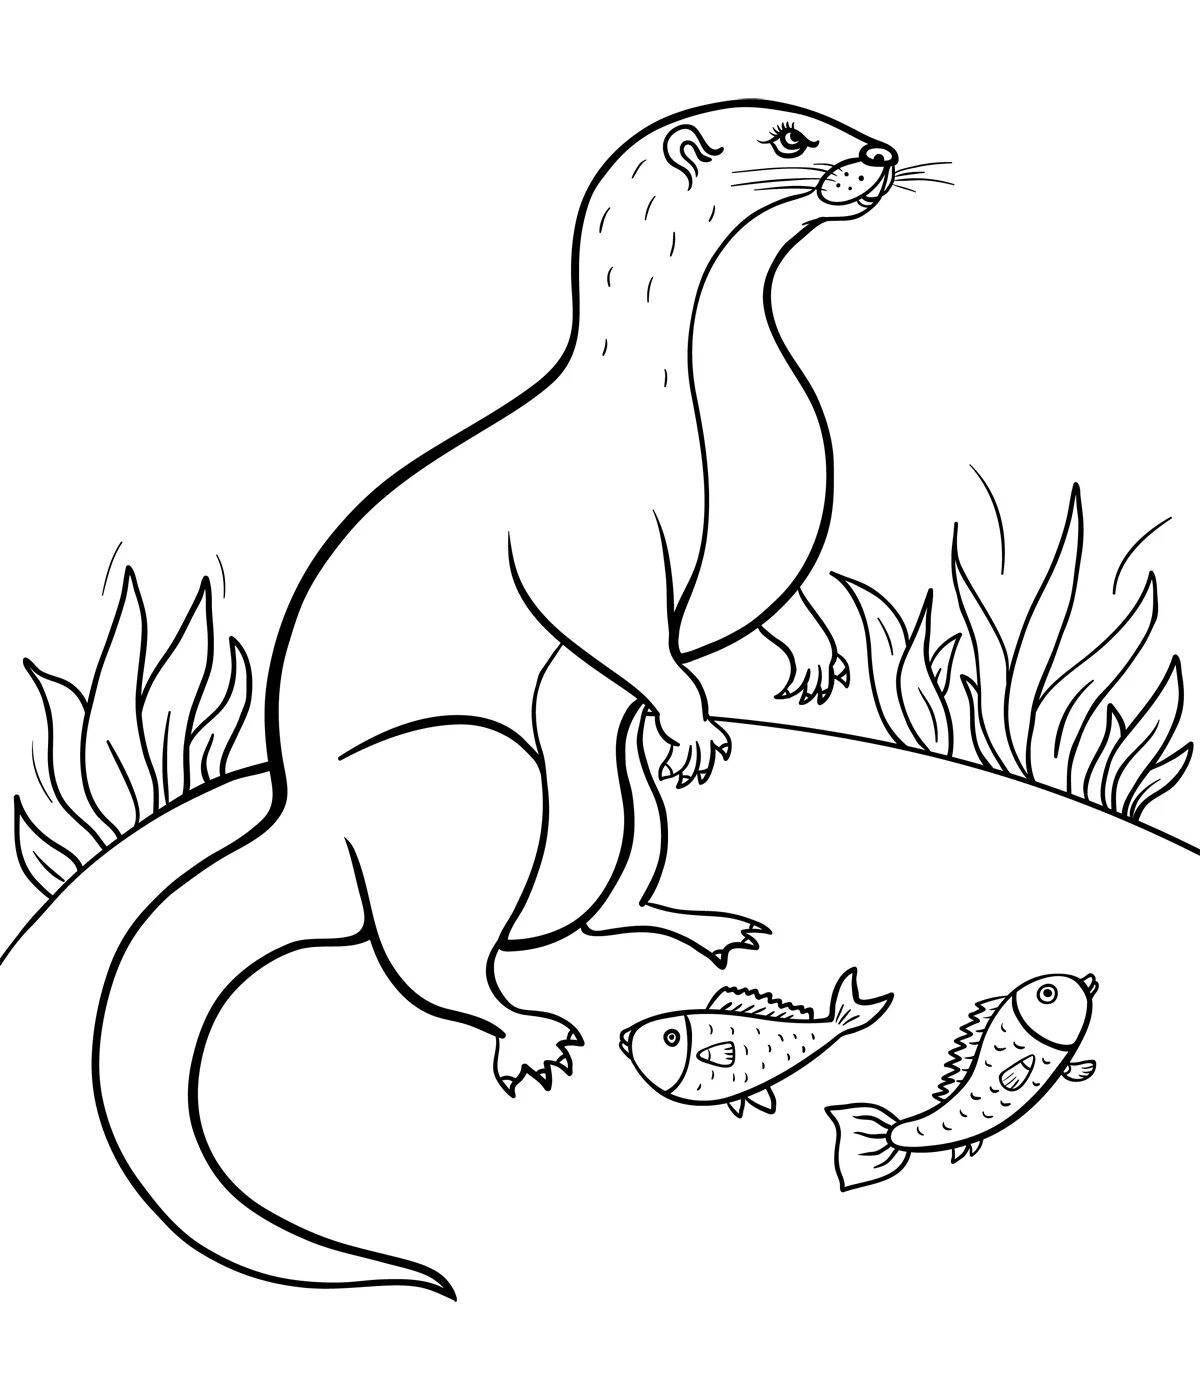 Vibrant meerkat coloring page